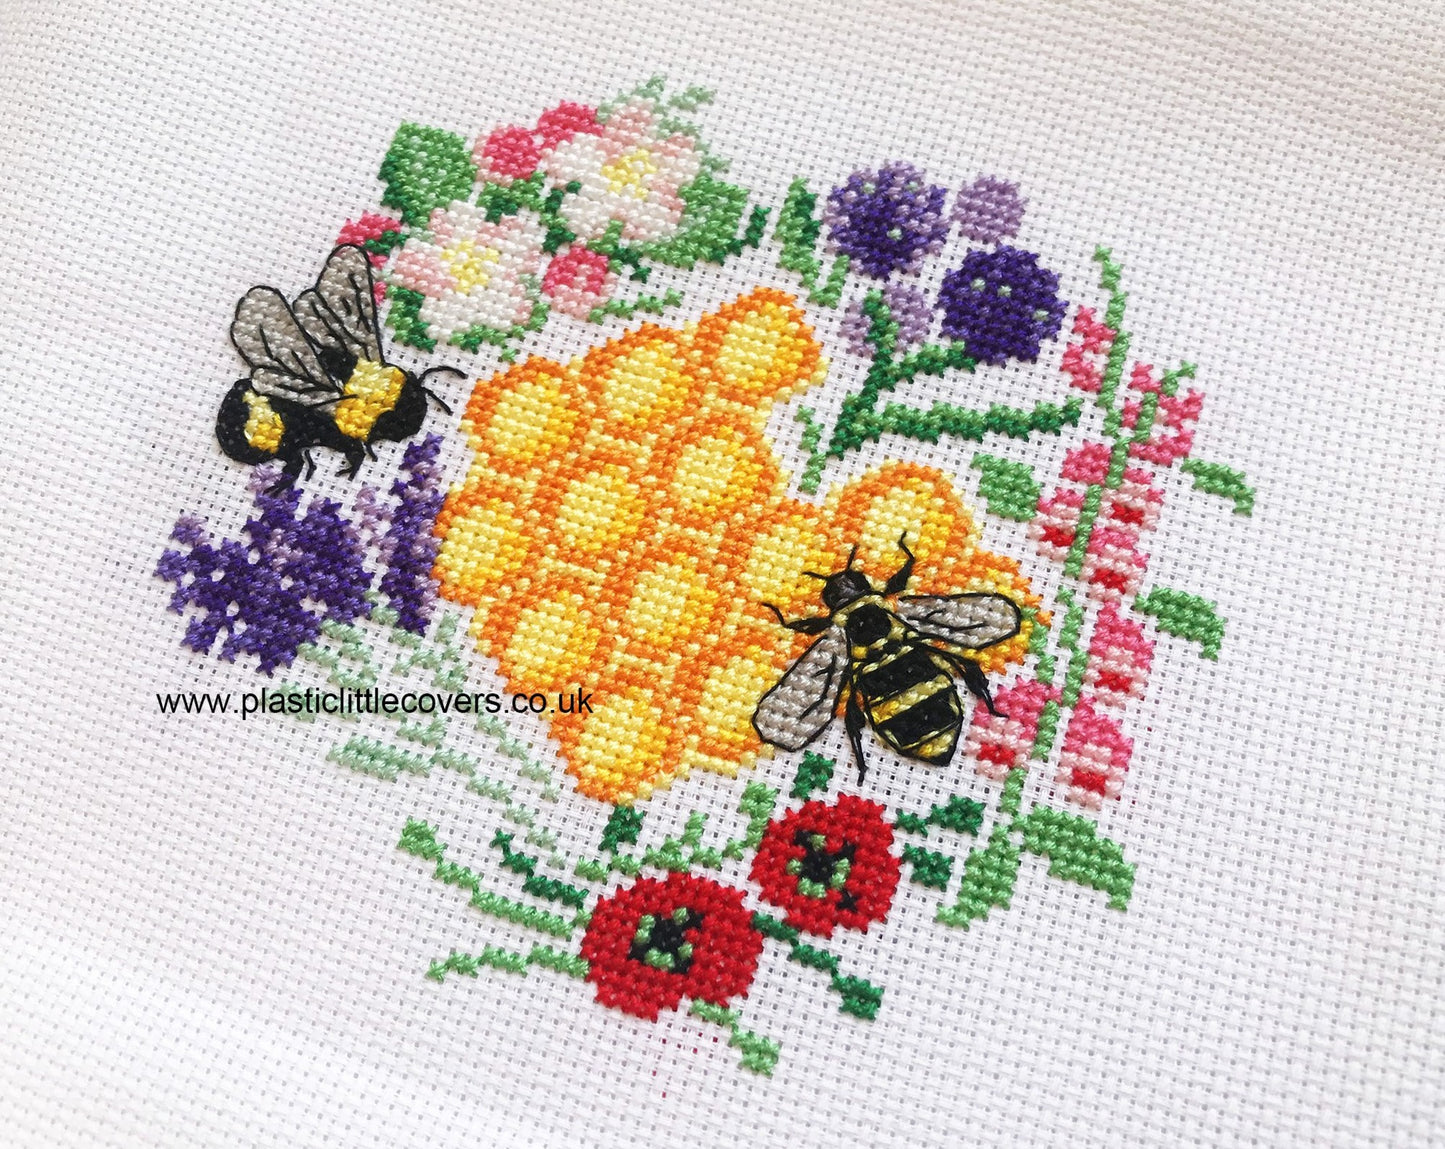 Bees and Blooms - Cross Stitch Pattern PDF.